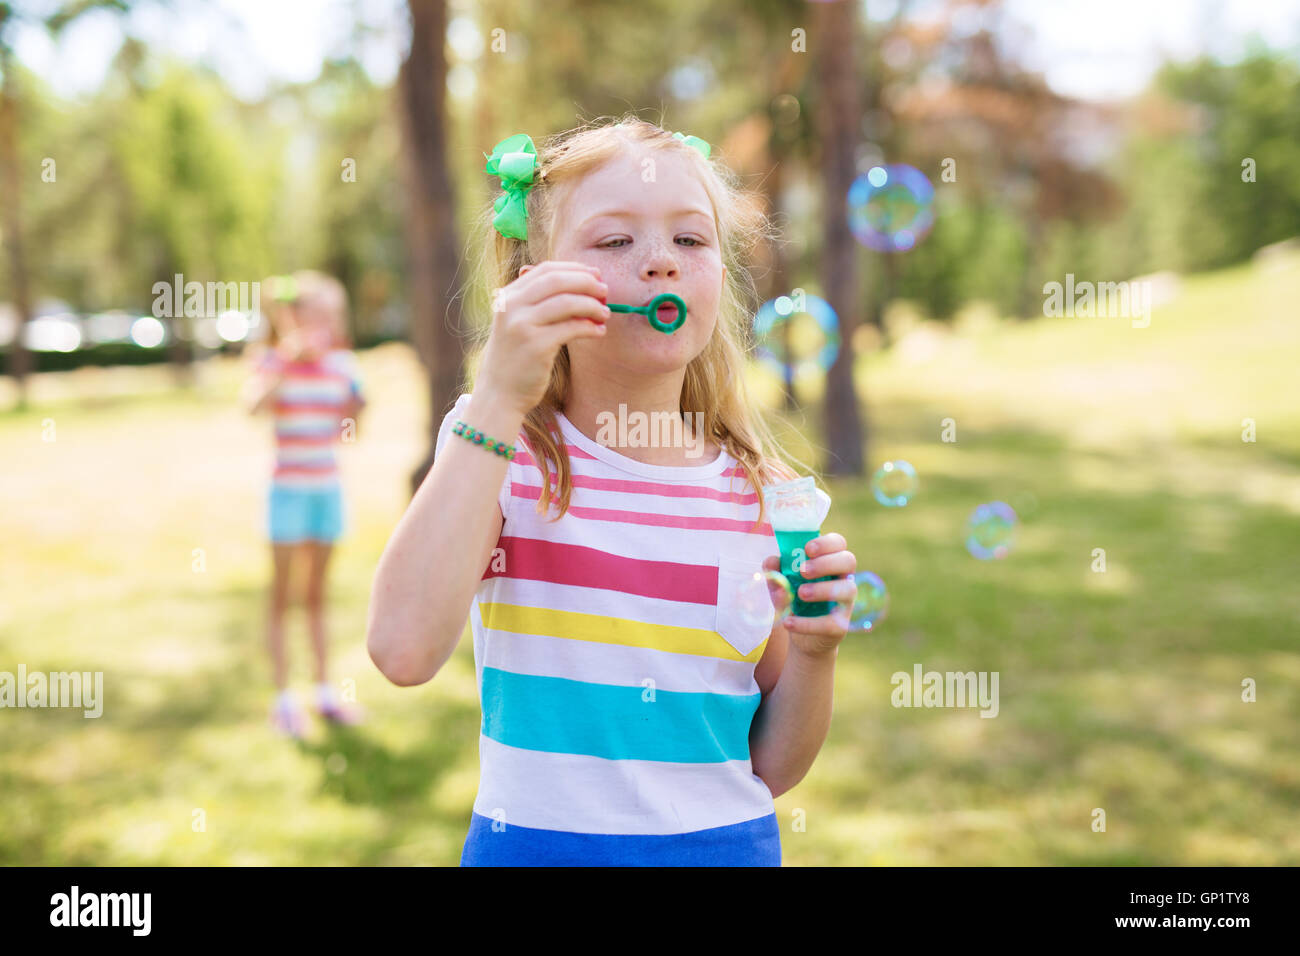 Shot of blond and freckled little girl with ponytails wearing striped t-shirt blowing bubbles in green park on sunny day. Simila Stock Photo